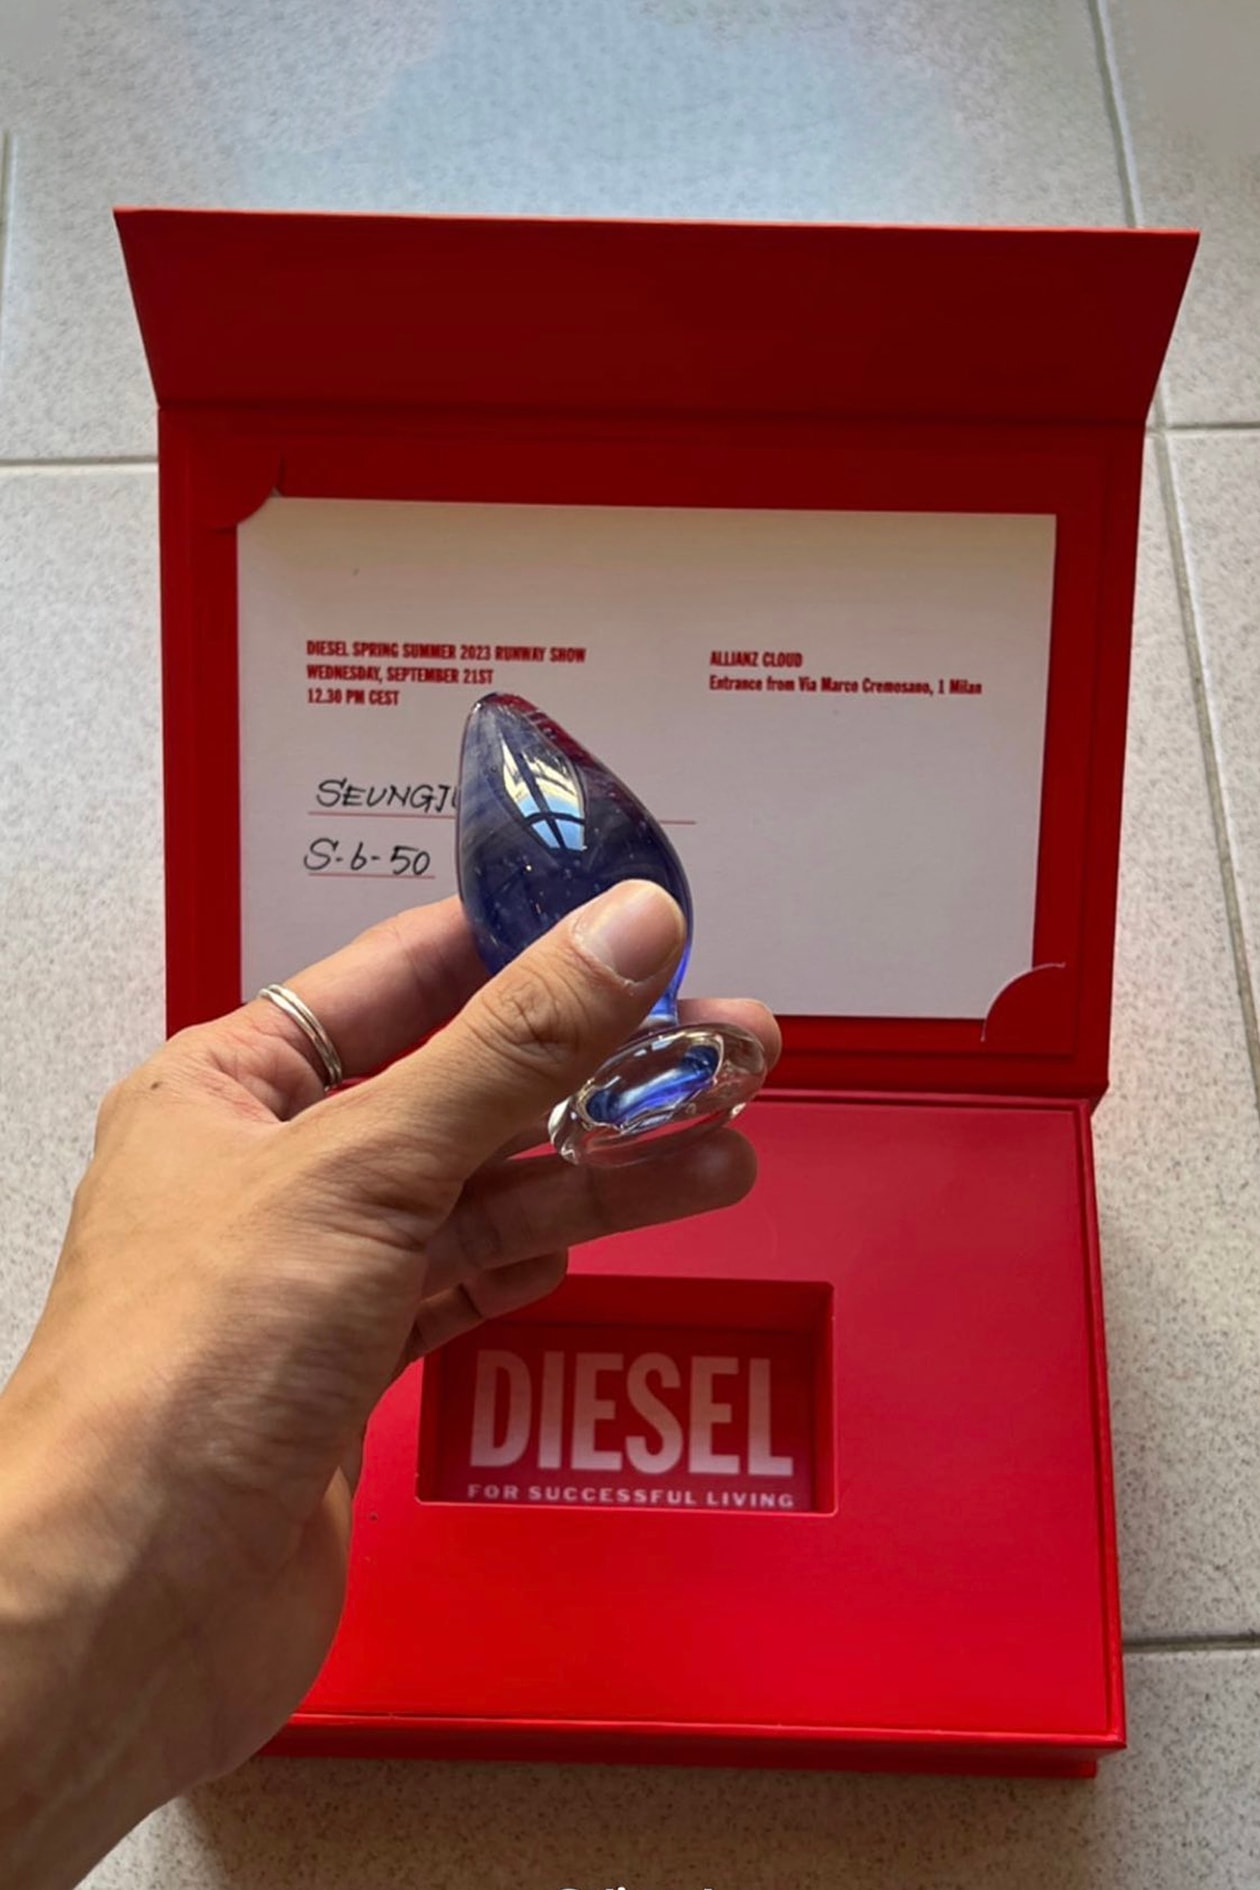 fashion diesel collections campaigns Milan fashion week spring summer 2023 fall winter 2023 2024 sex positivity tom of Finland durex lelo sexual wellness